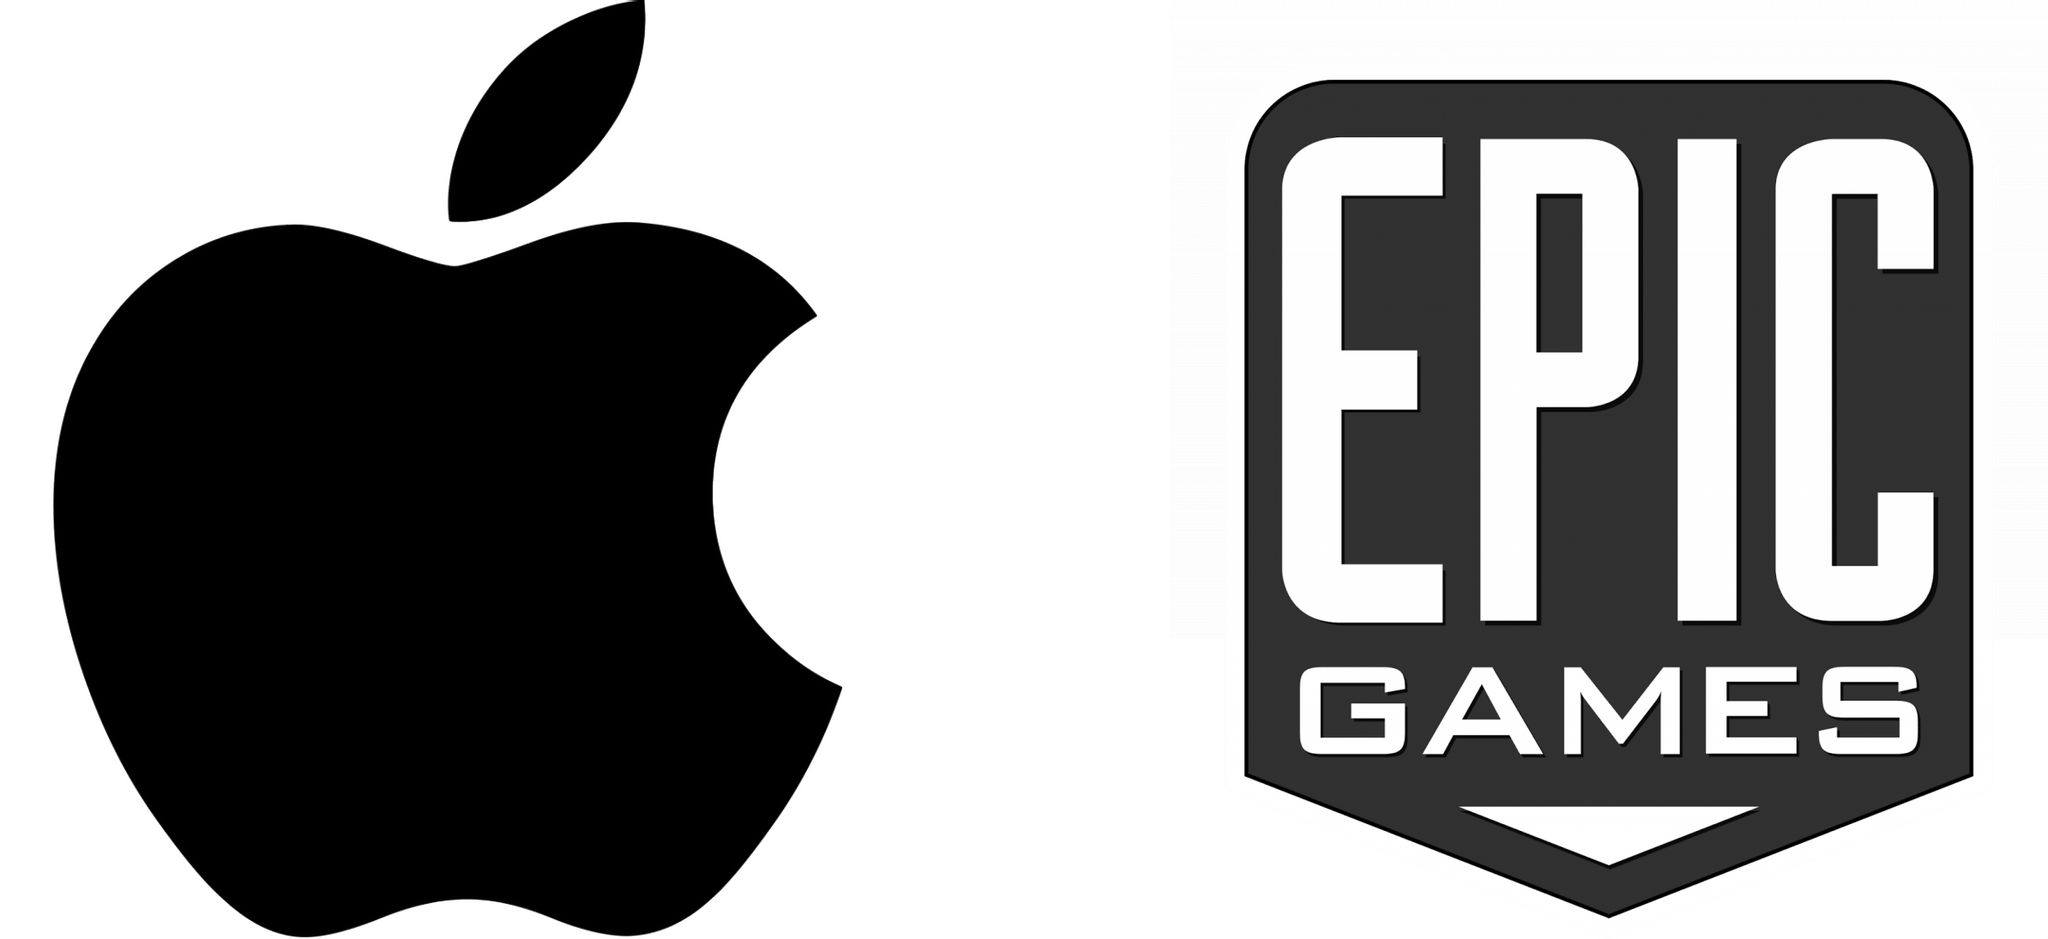 Epic Games Takes Apple Battle To The Supreme Court: What’s At Stake?